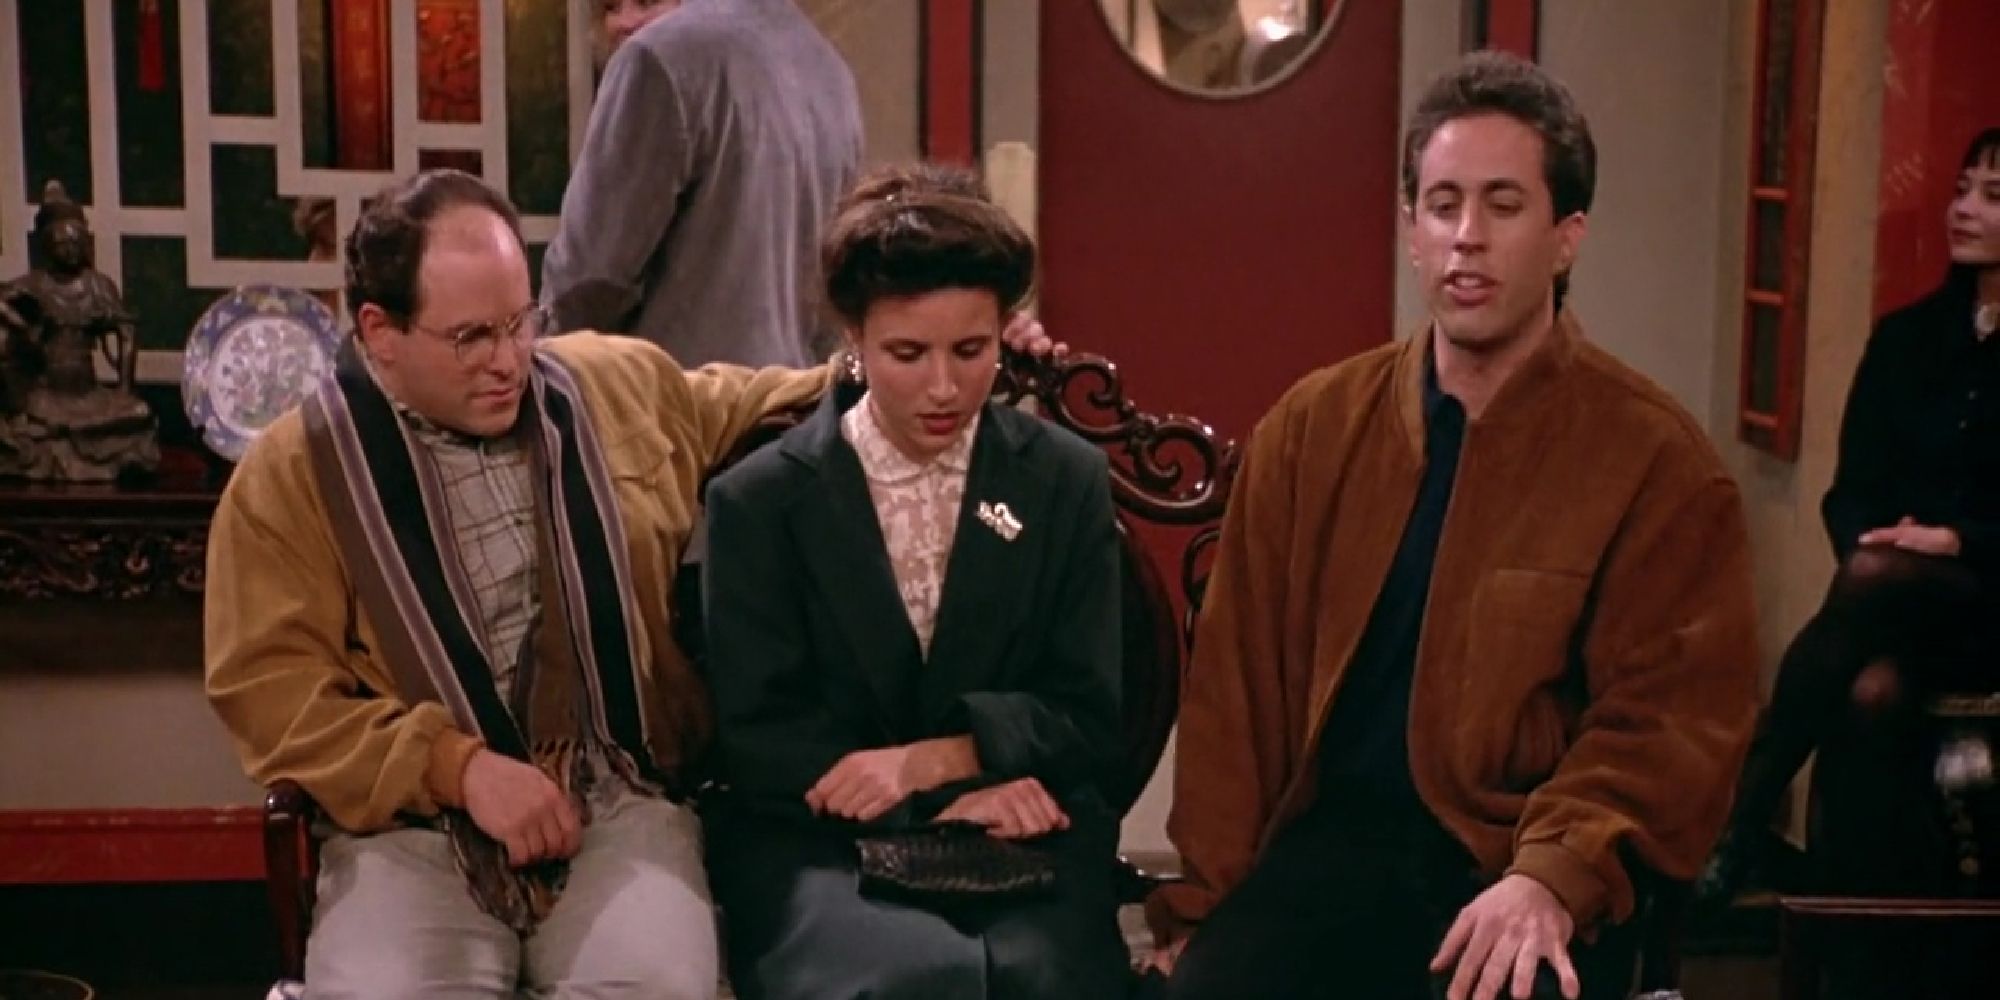 George, Elaine, and Jerry waiting for their table in "The Chinese Restaurant"